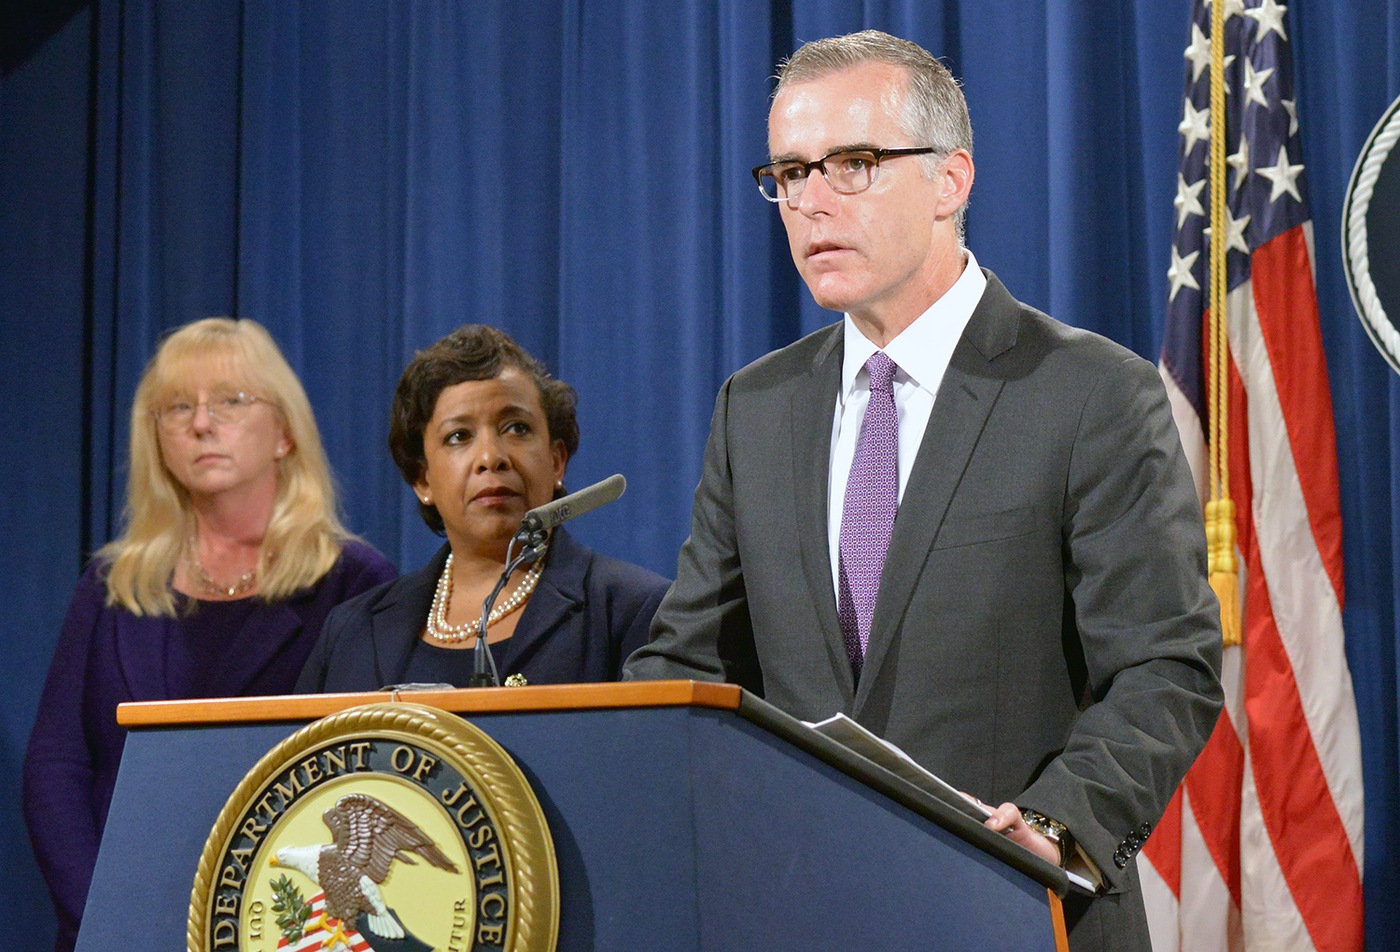 FBI Deputy Director Andrew McCabe speaks at a July 20, 2016 press conference announcing U.S. efforts to recover more than $1 billion in assets tied to international public corruption and a global money laundering conspiracy.